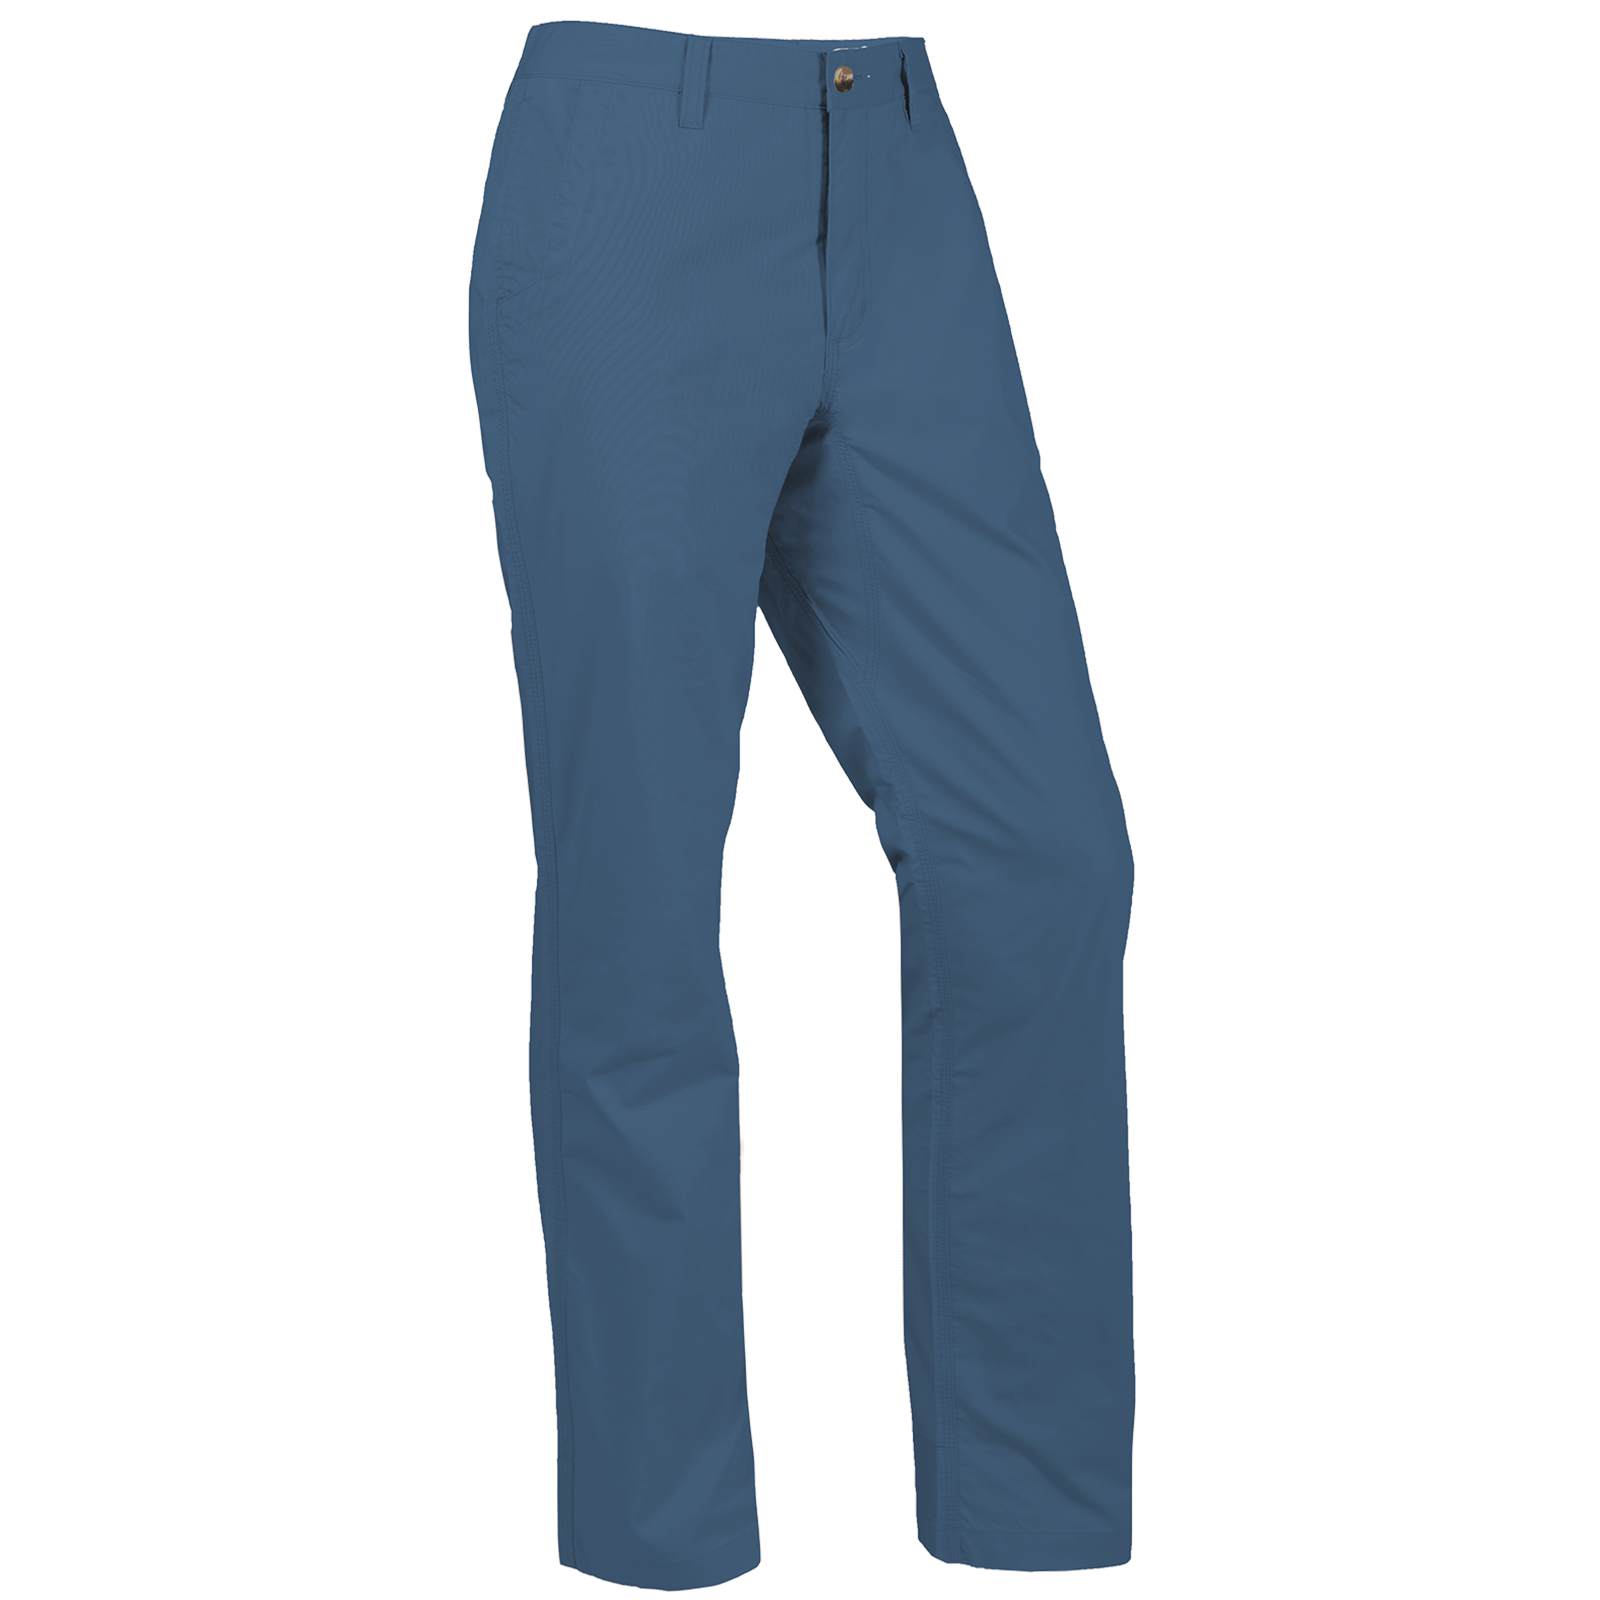 Long pants 👖 from Montane 